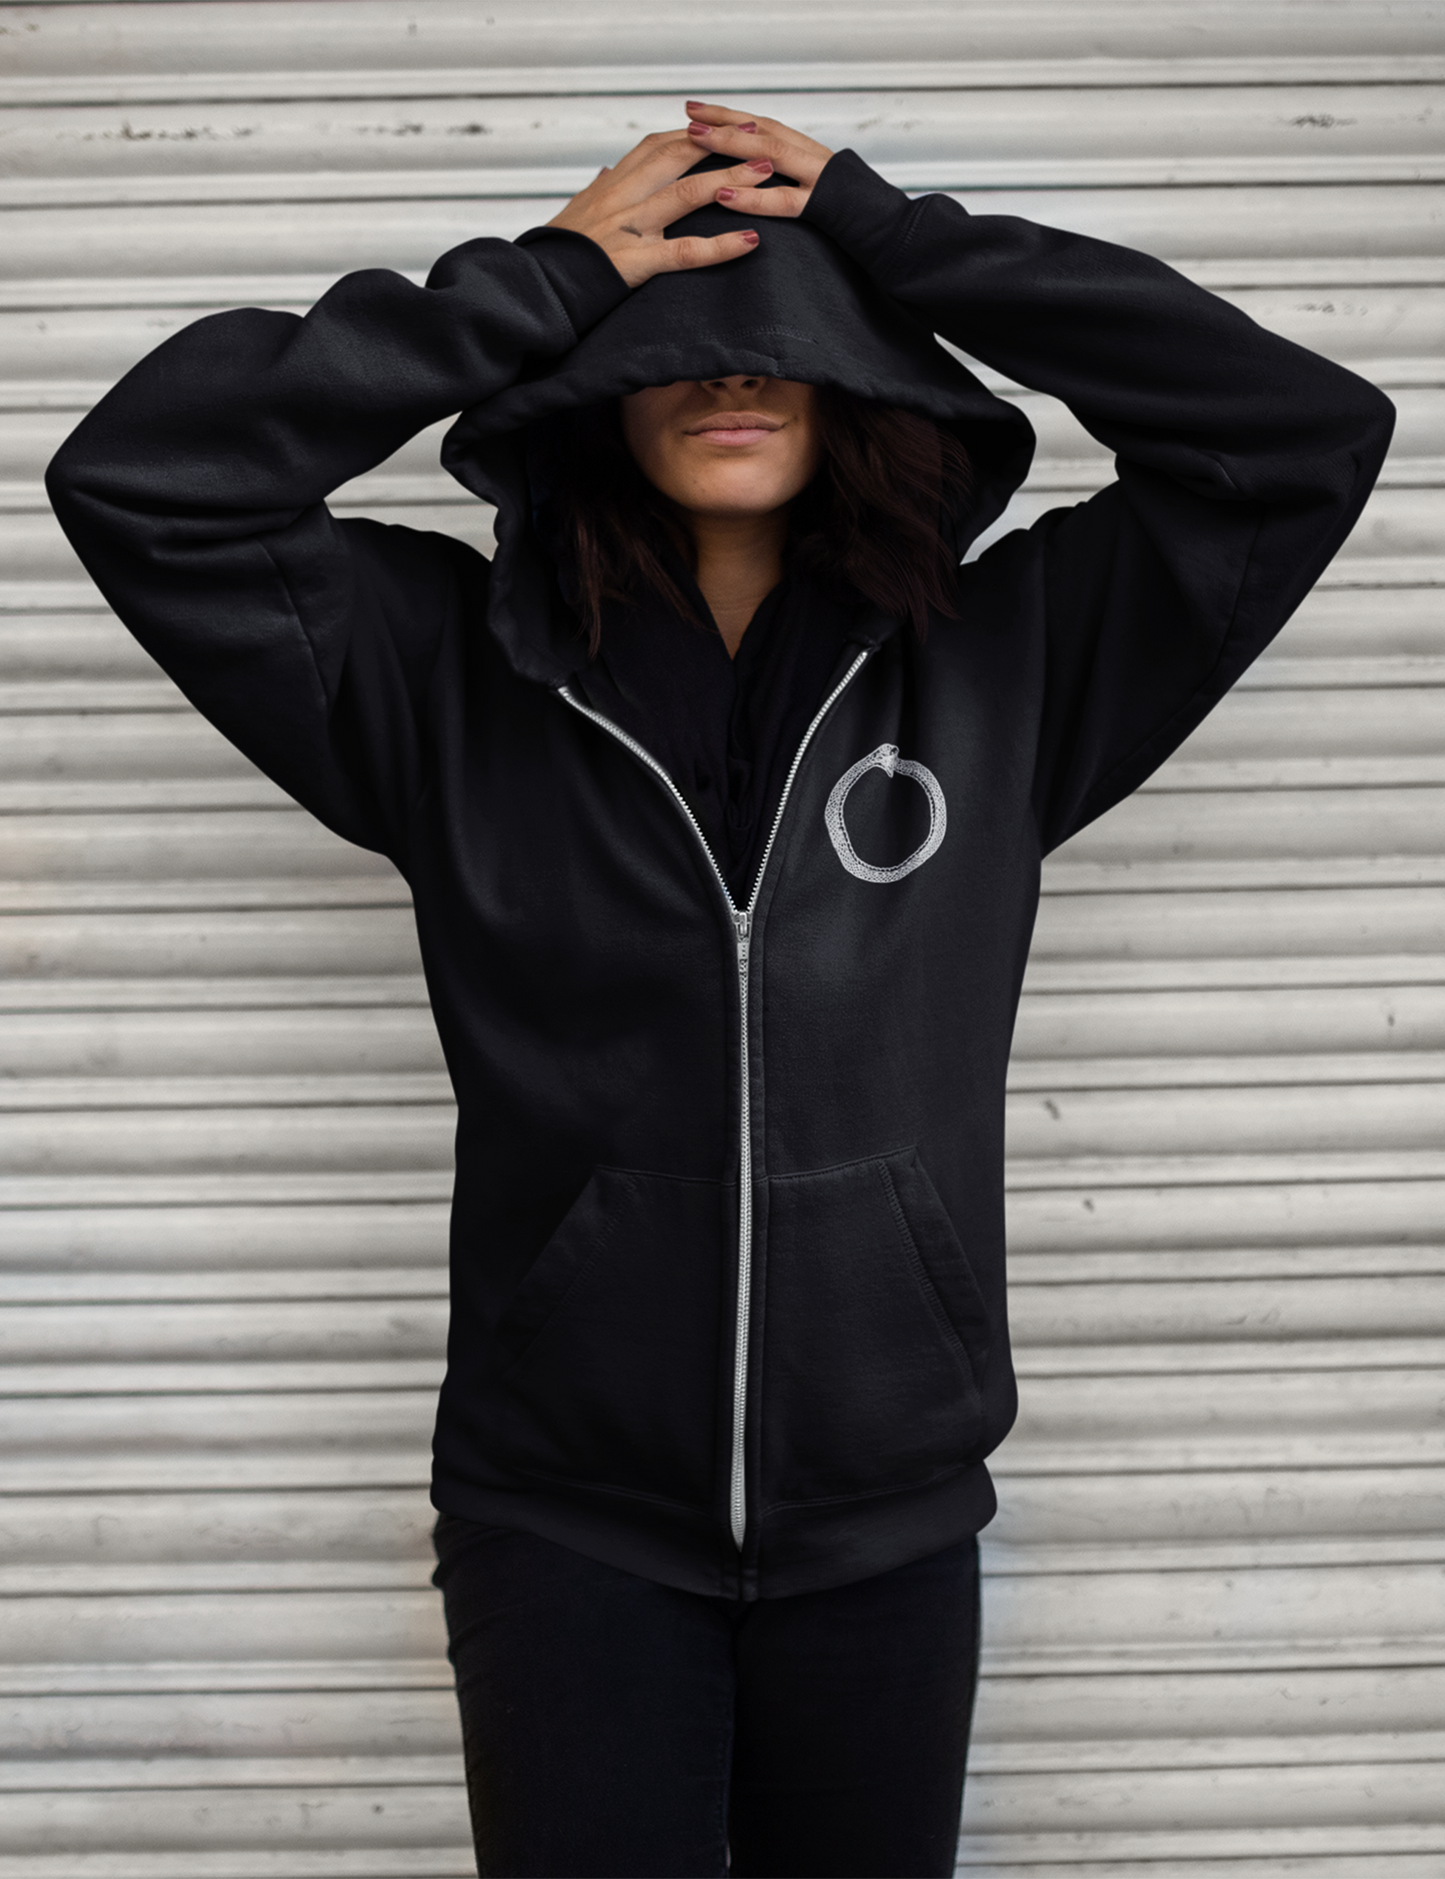 Ouroboros Esoteric Occult Alchemy Zip Up Hoodie